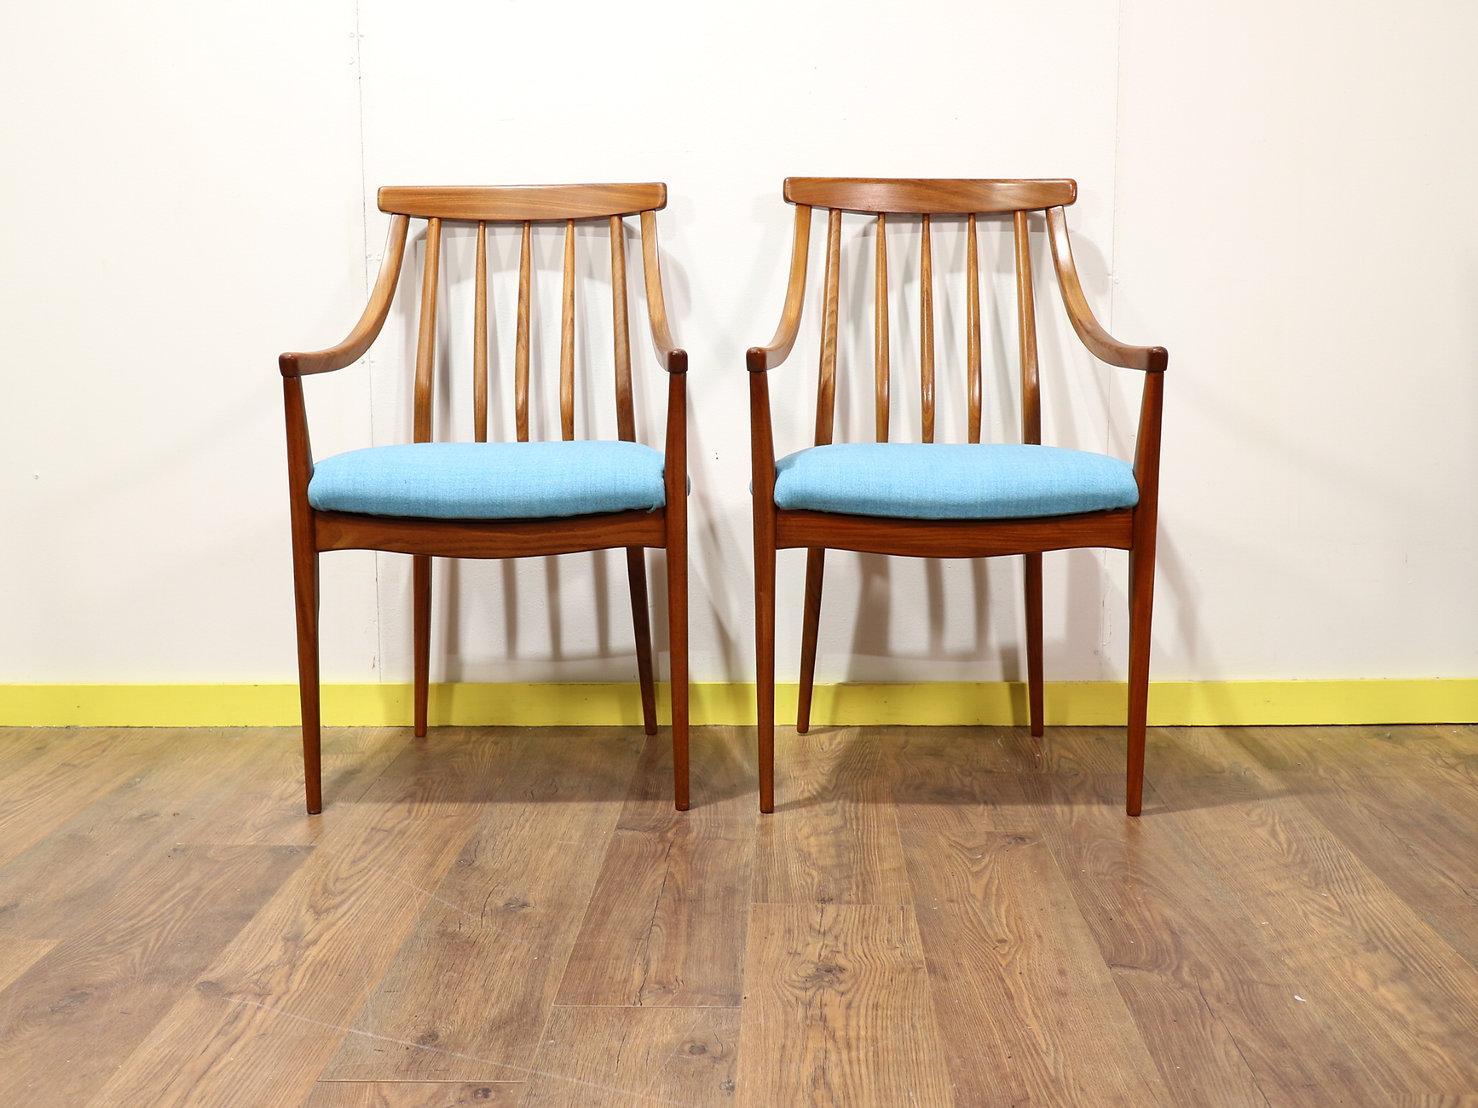 British Mid-Century Modern Dining Chairs x 6 by A. Younger